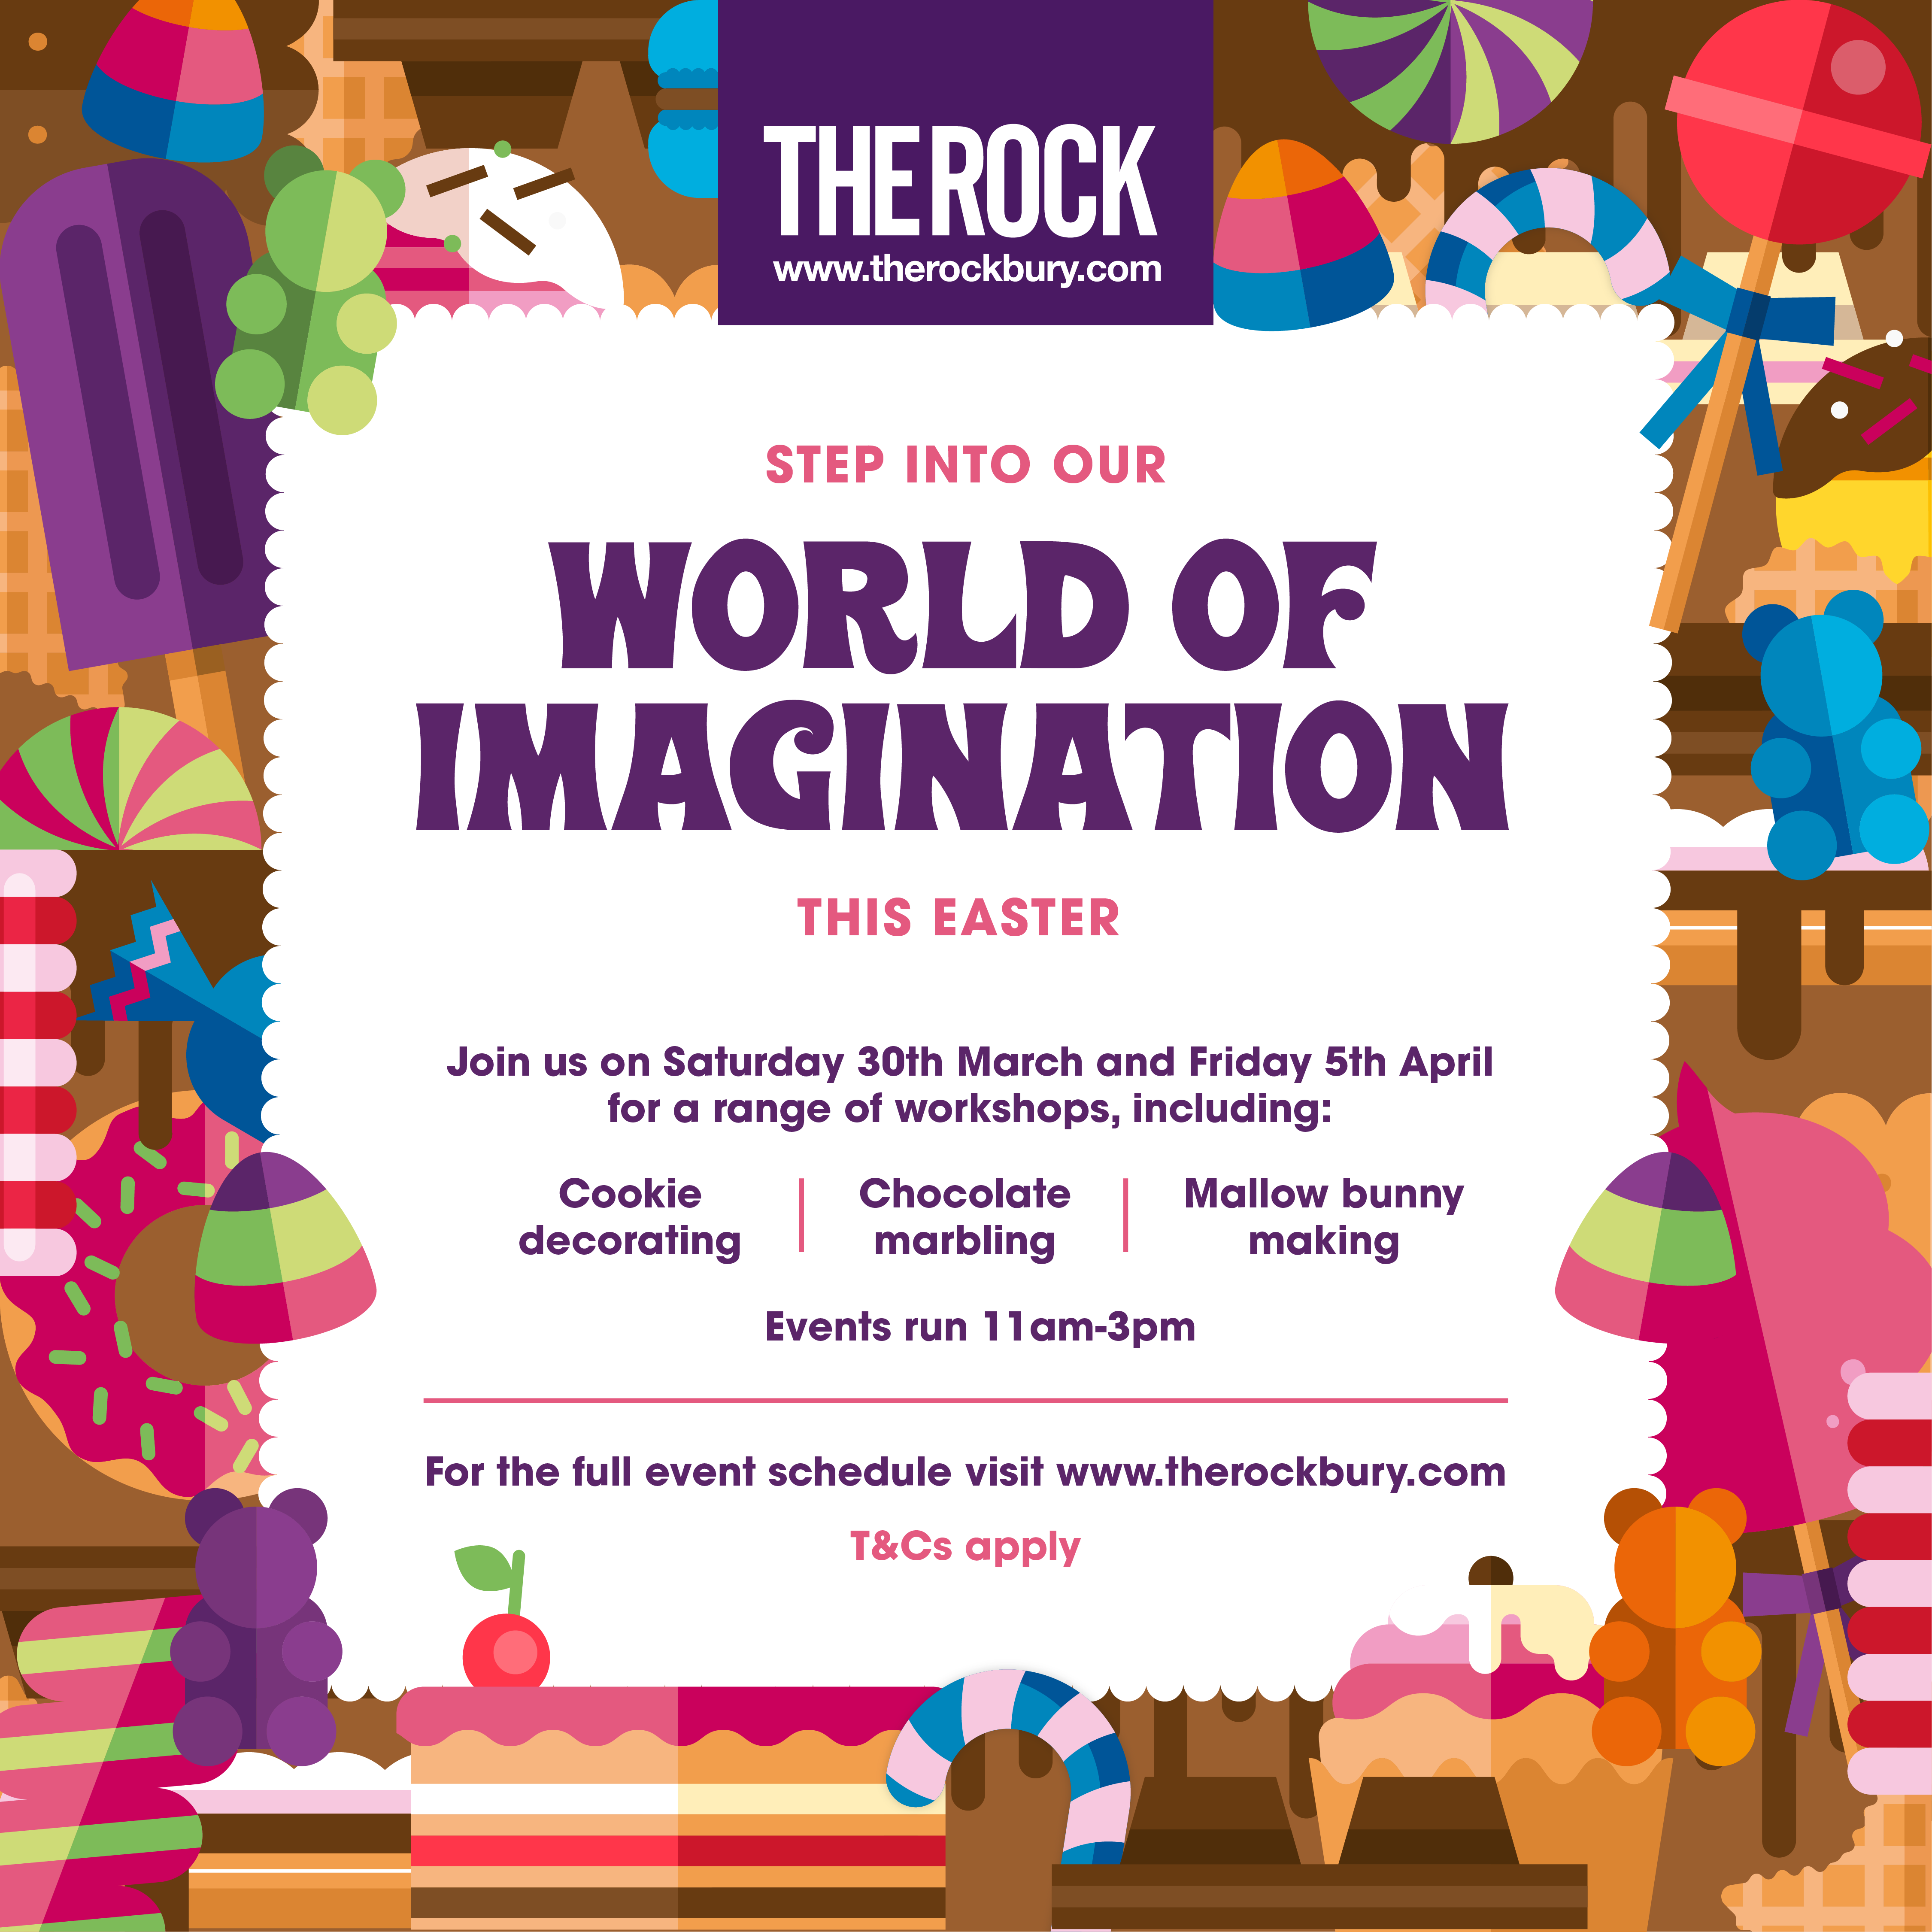 Step into our WORLD OF IMAGINATION this Easter